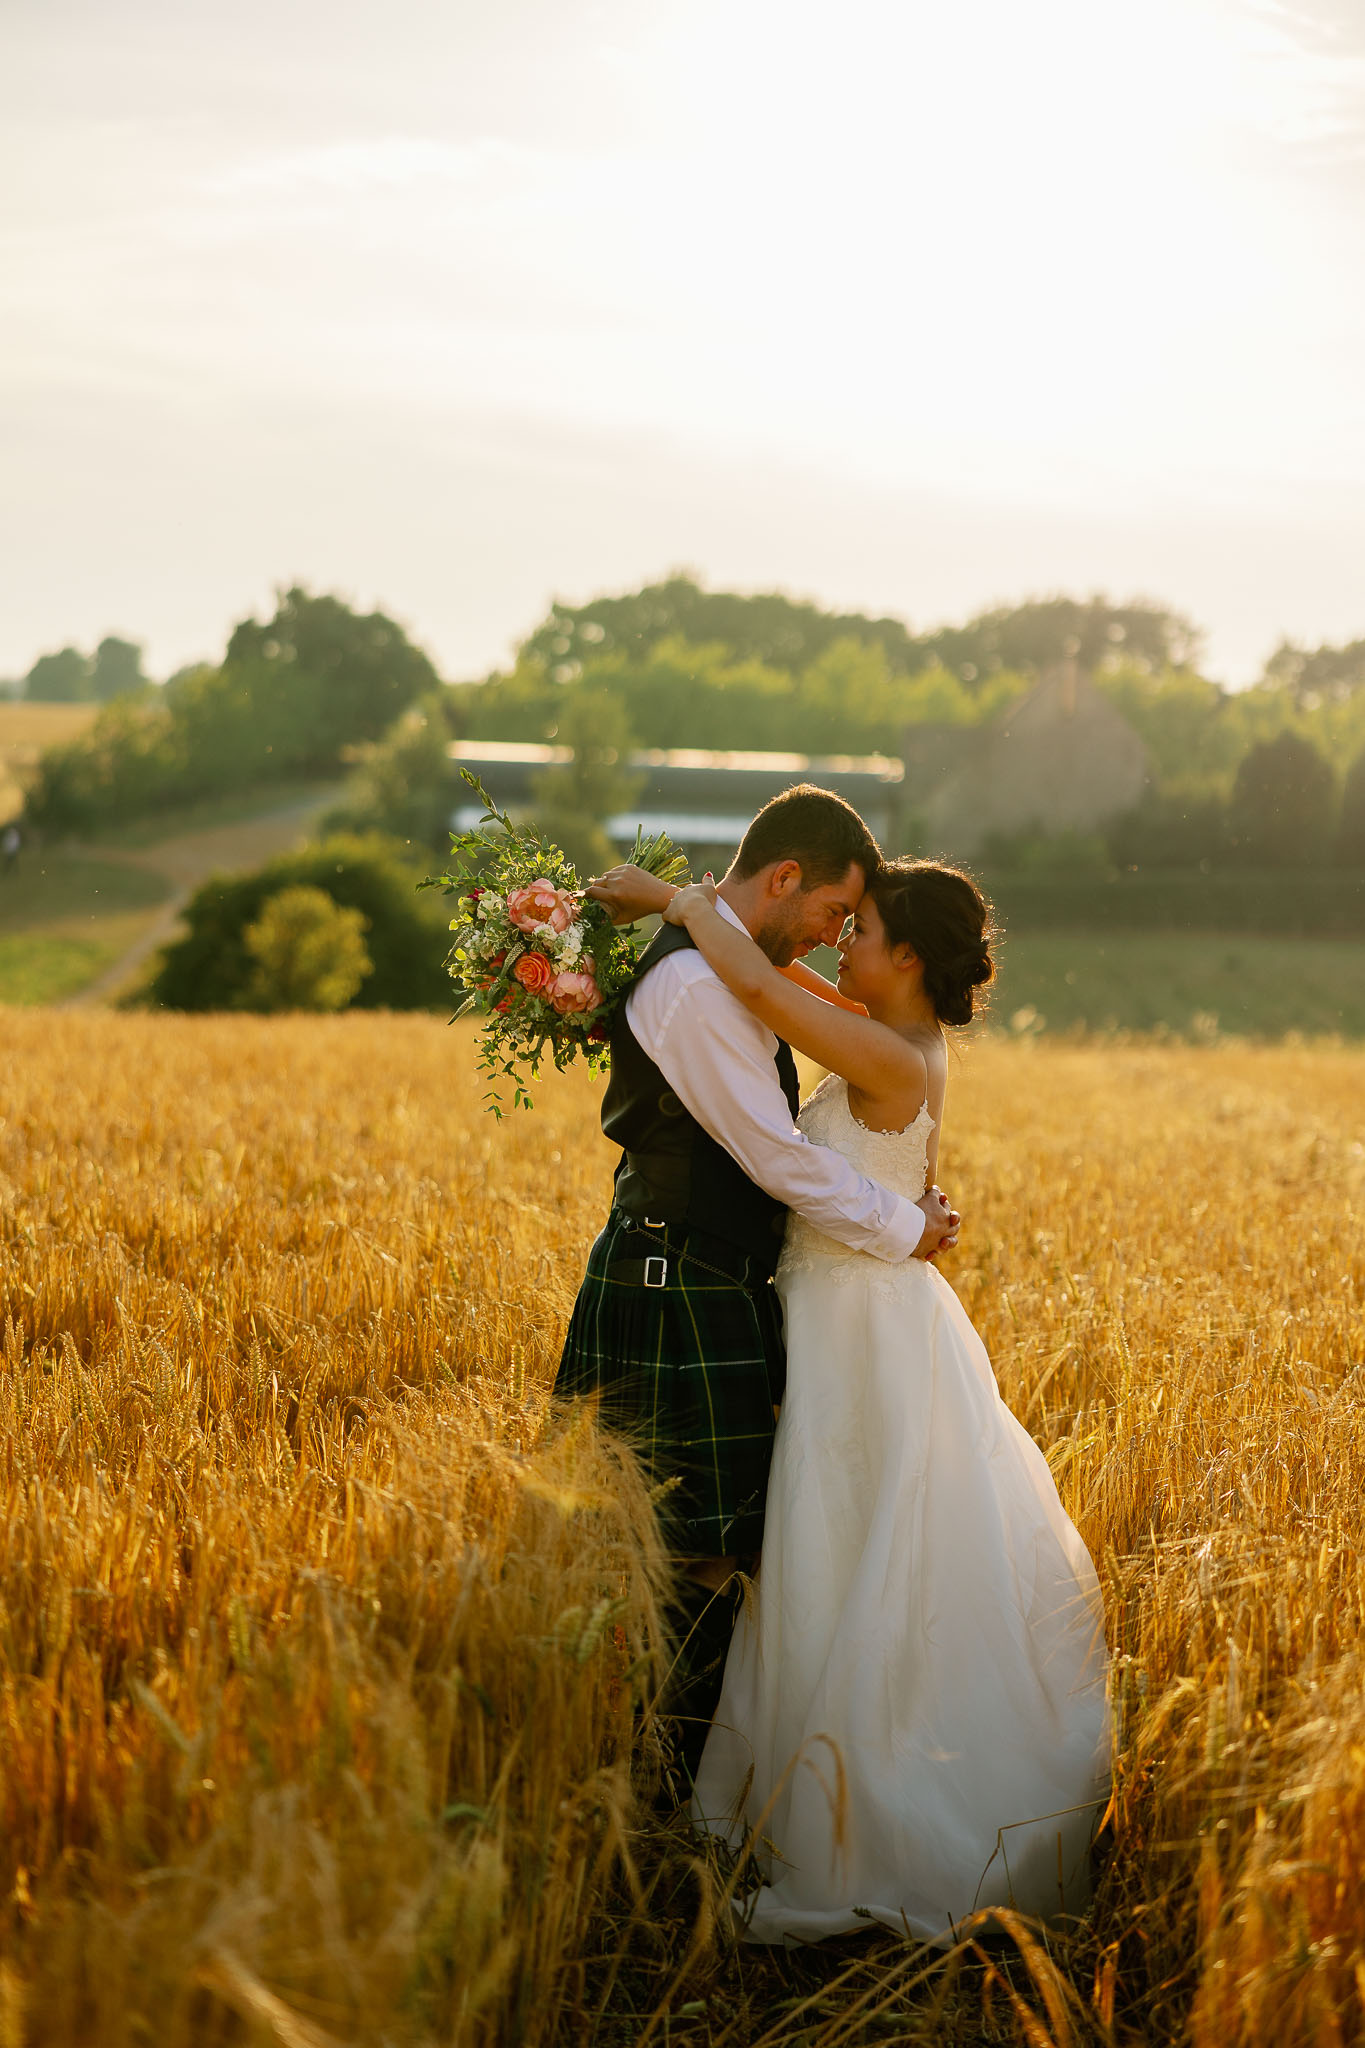 Beautiful wedding pictures of a couple in a corn field